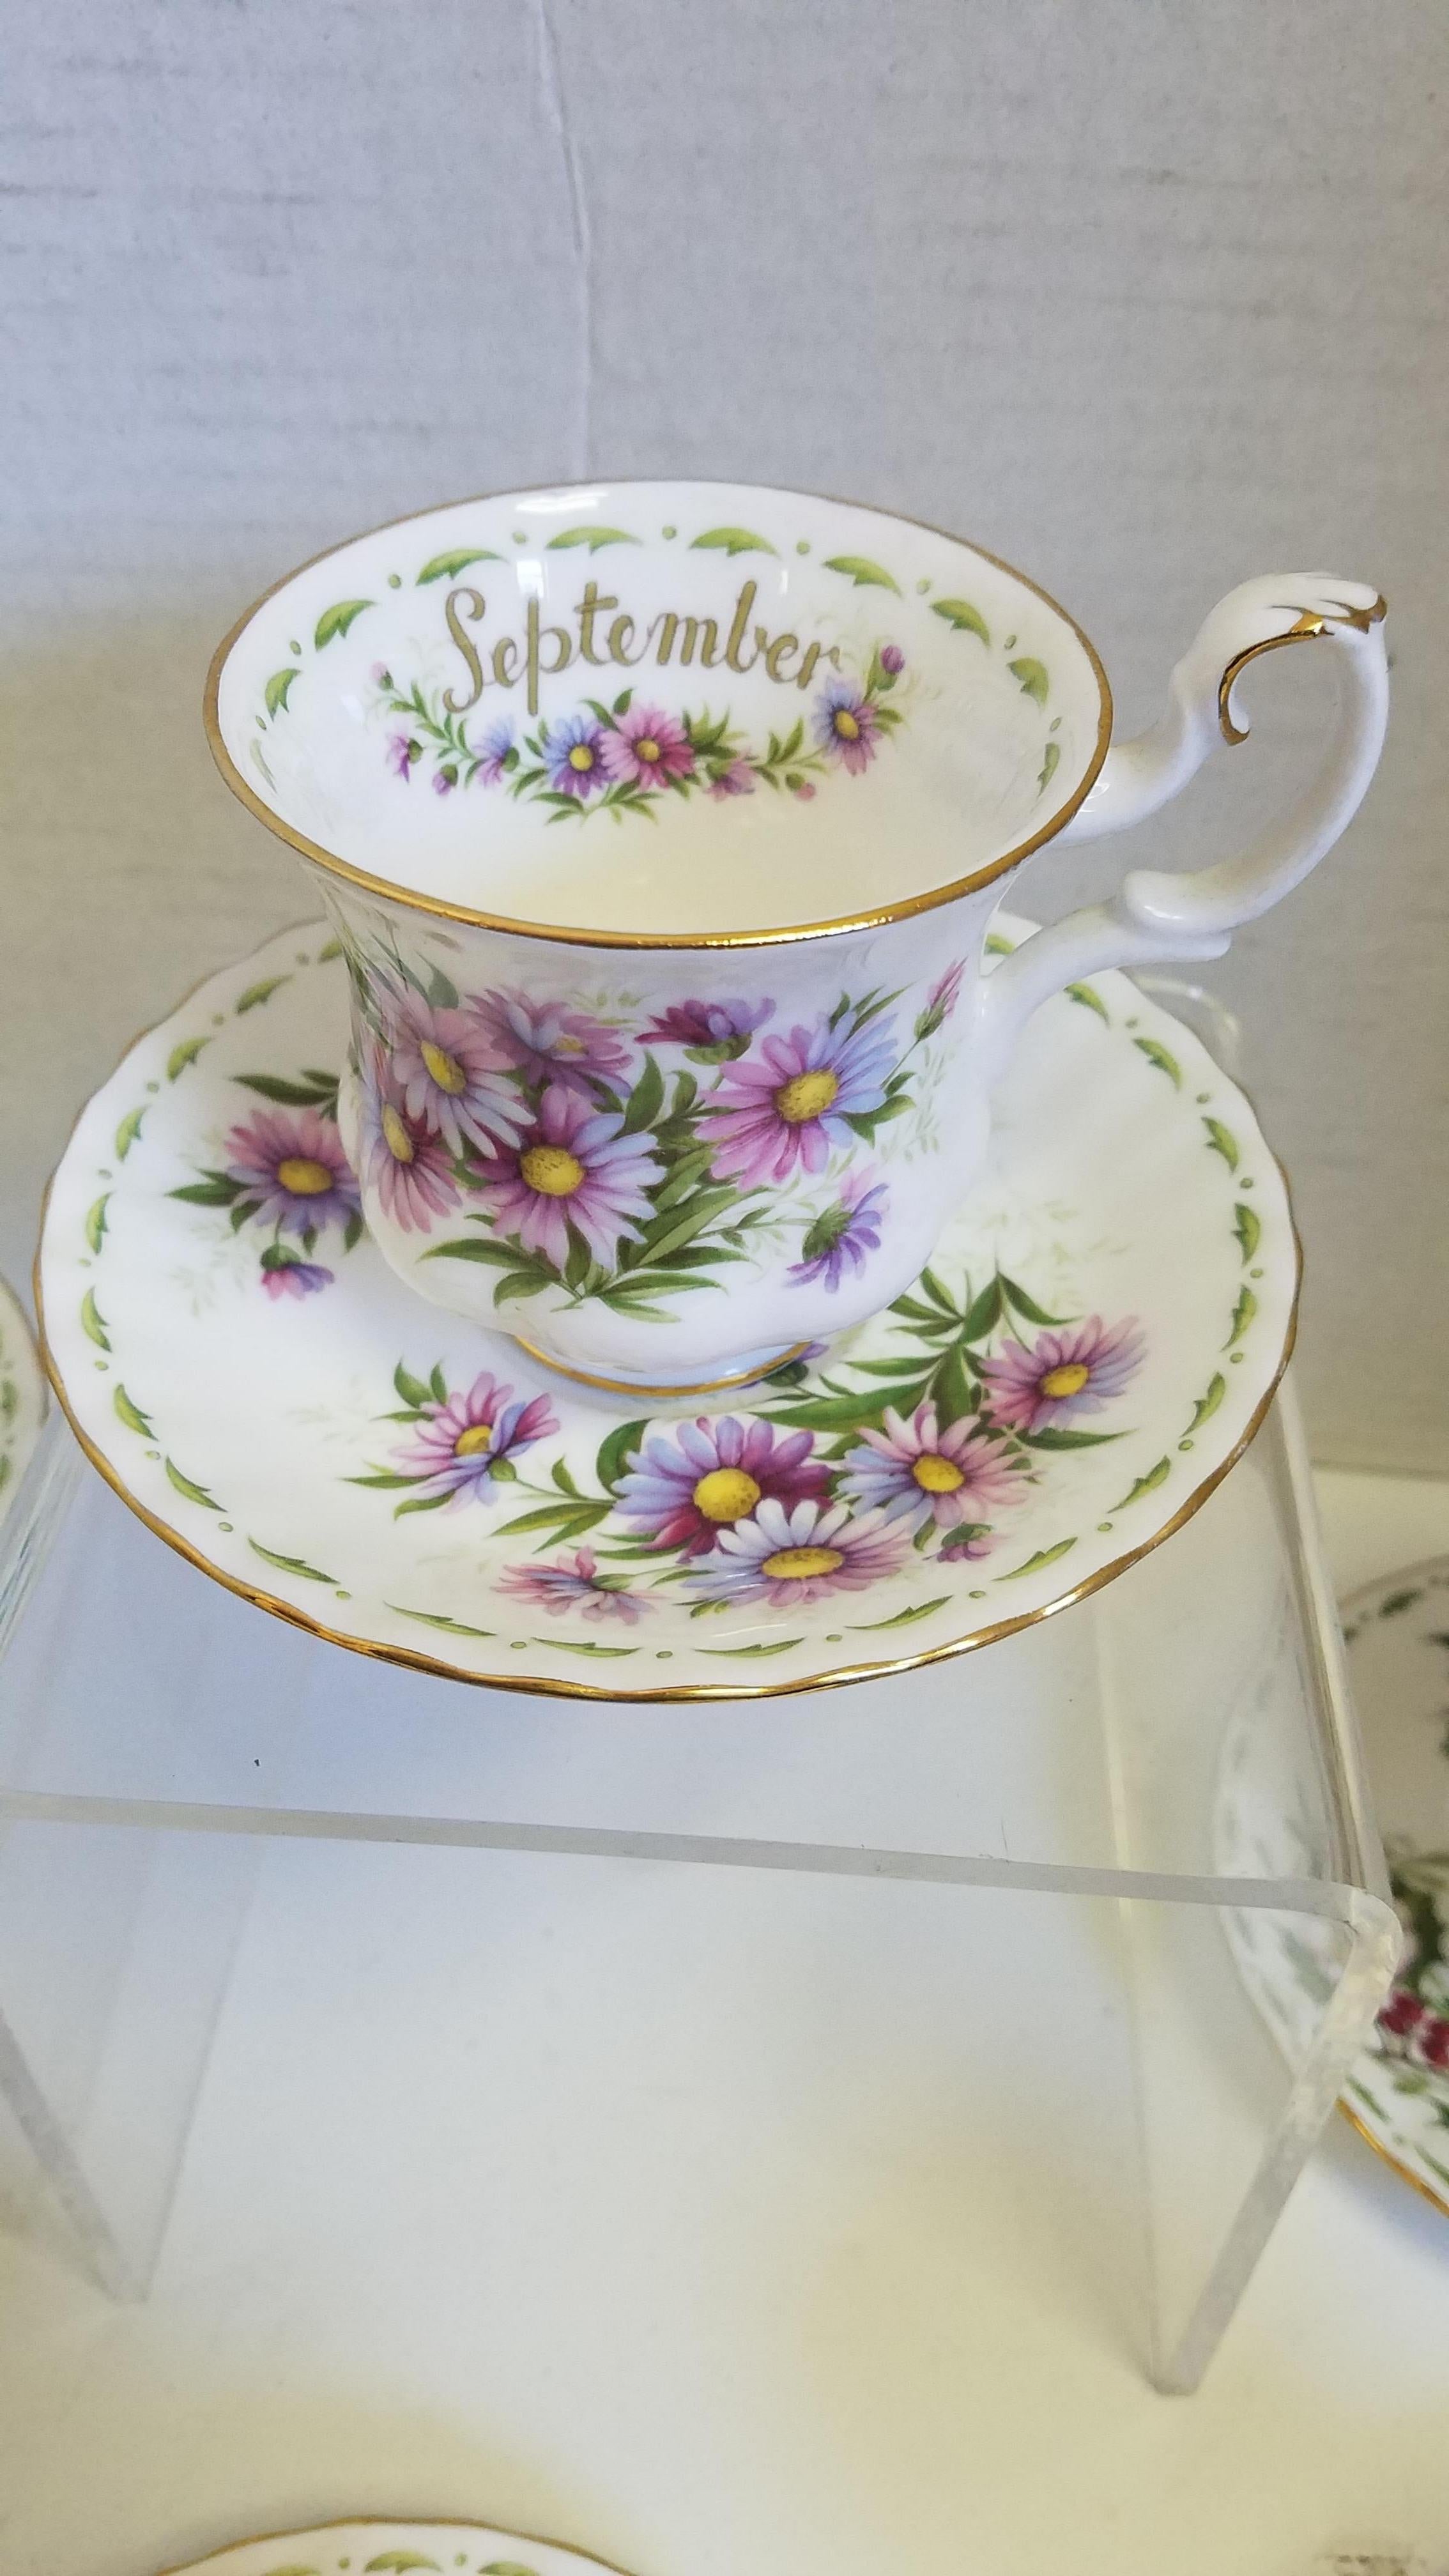 Set of 6 teacup and saucers by Royal Albert. They are English porcelain and are from the 